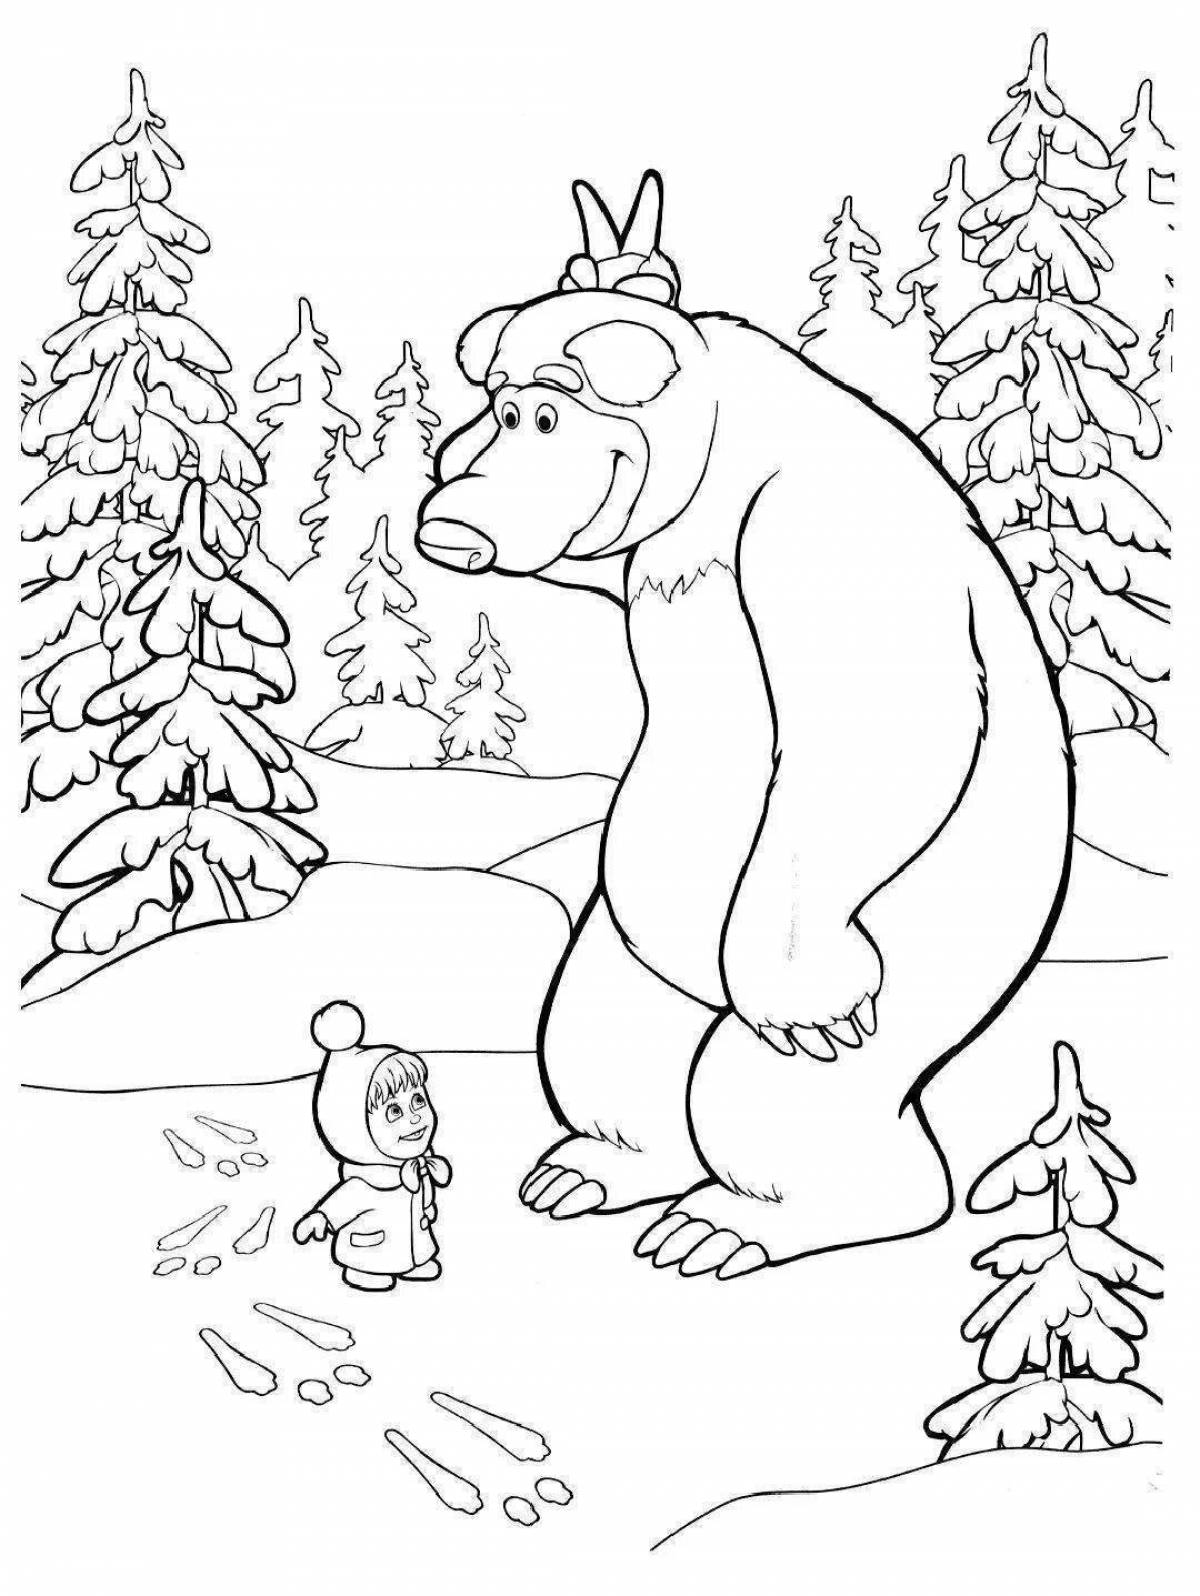 Bright Masha and the bear coloring pages for kids